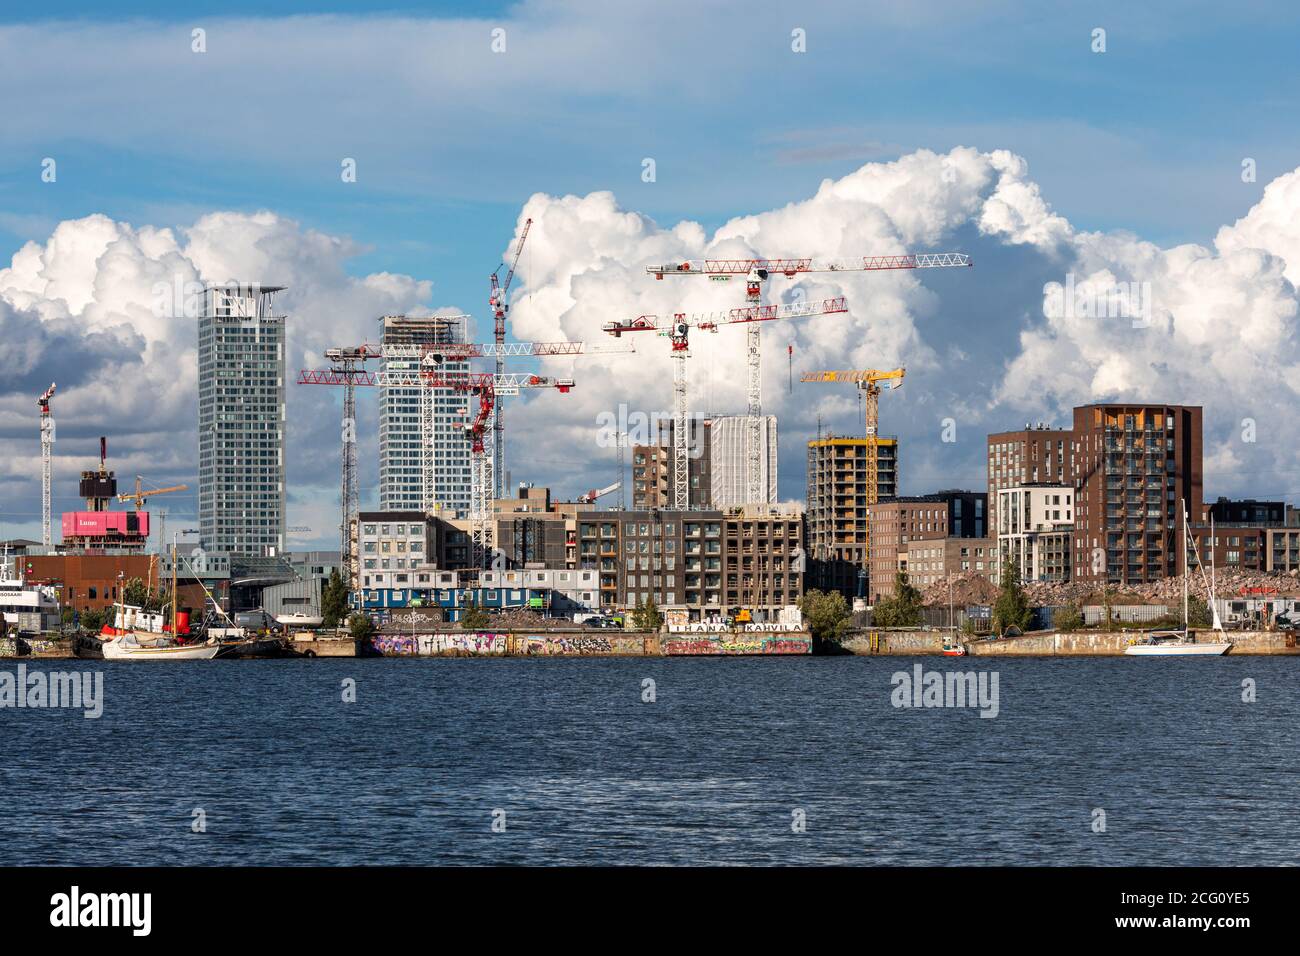 Sompasaari, turning slowly from cargo port to wasteland to modern residential district by sea in Helsinki, Finland Stock Photo